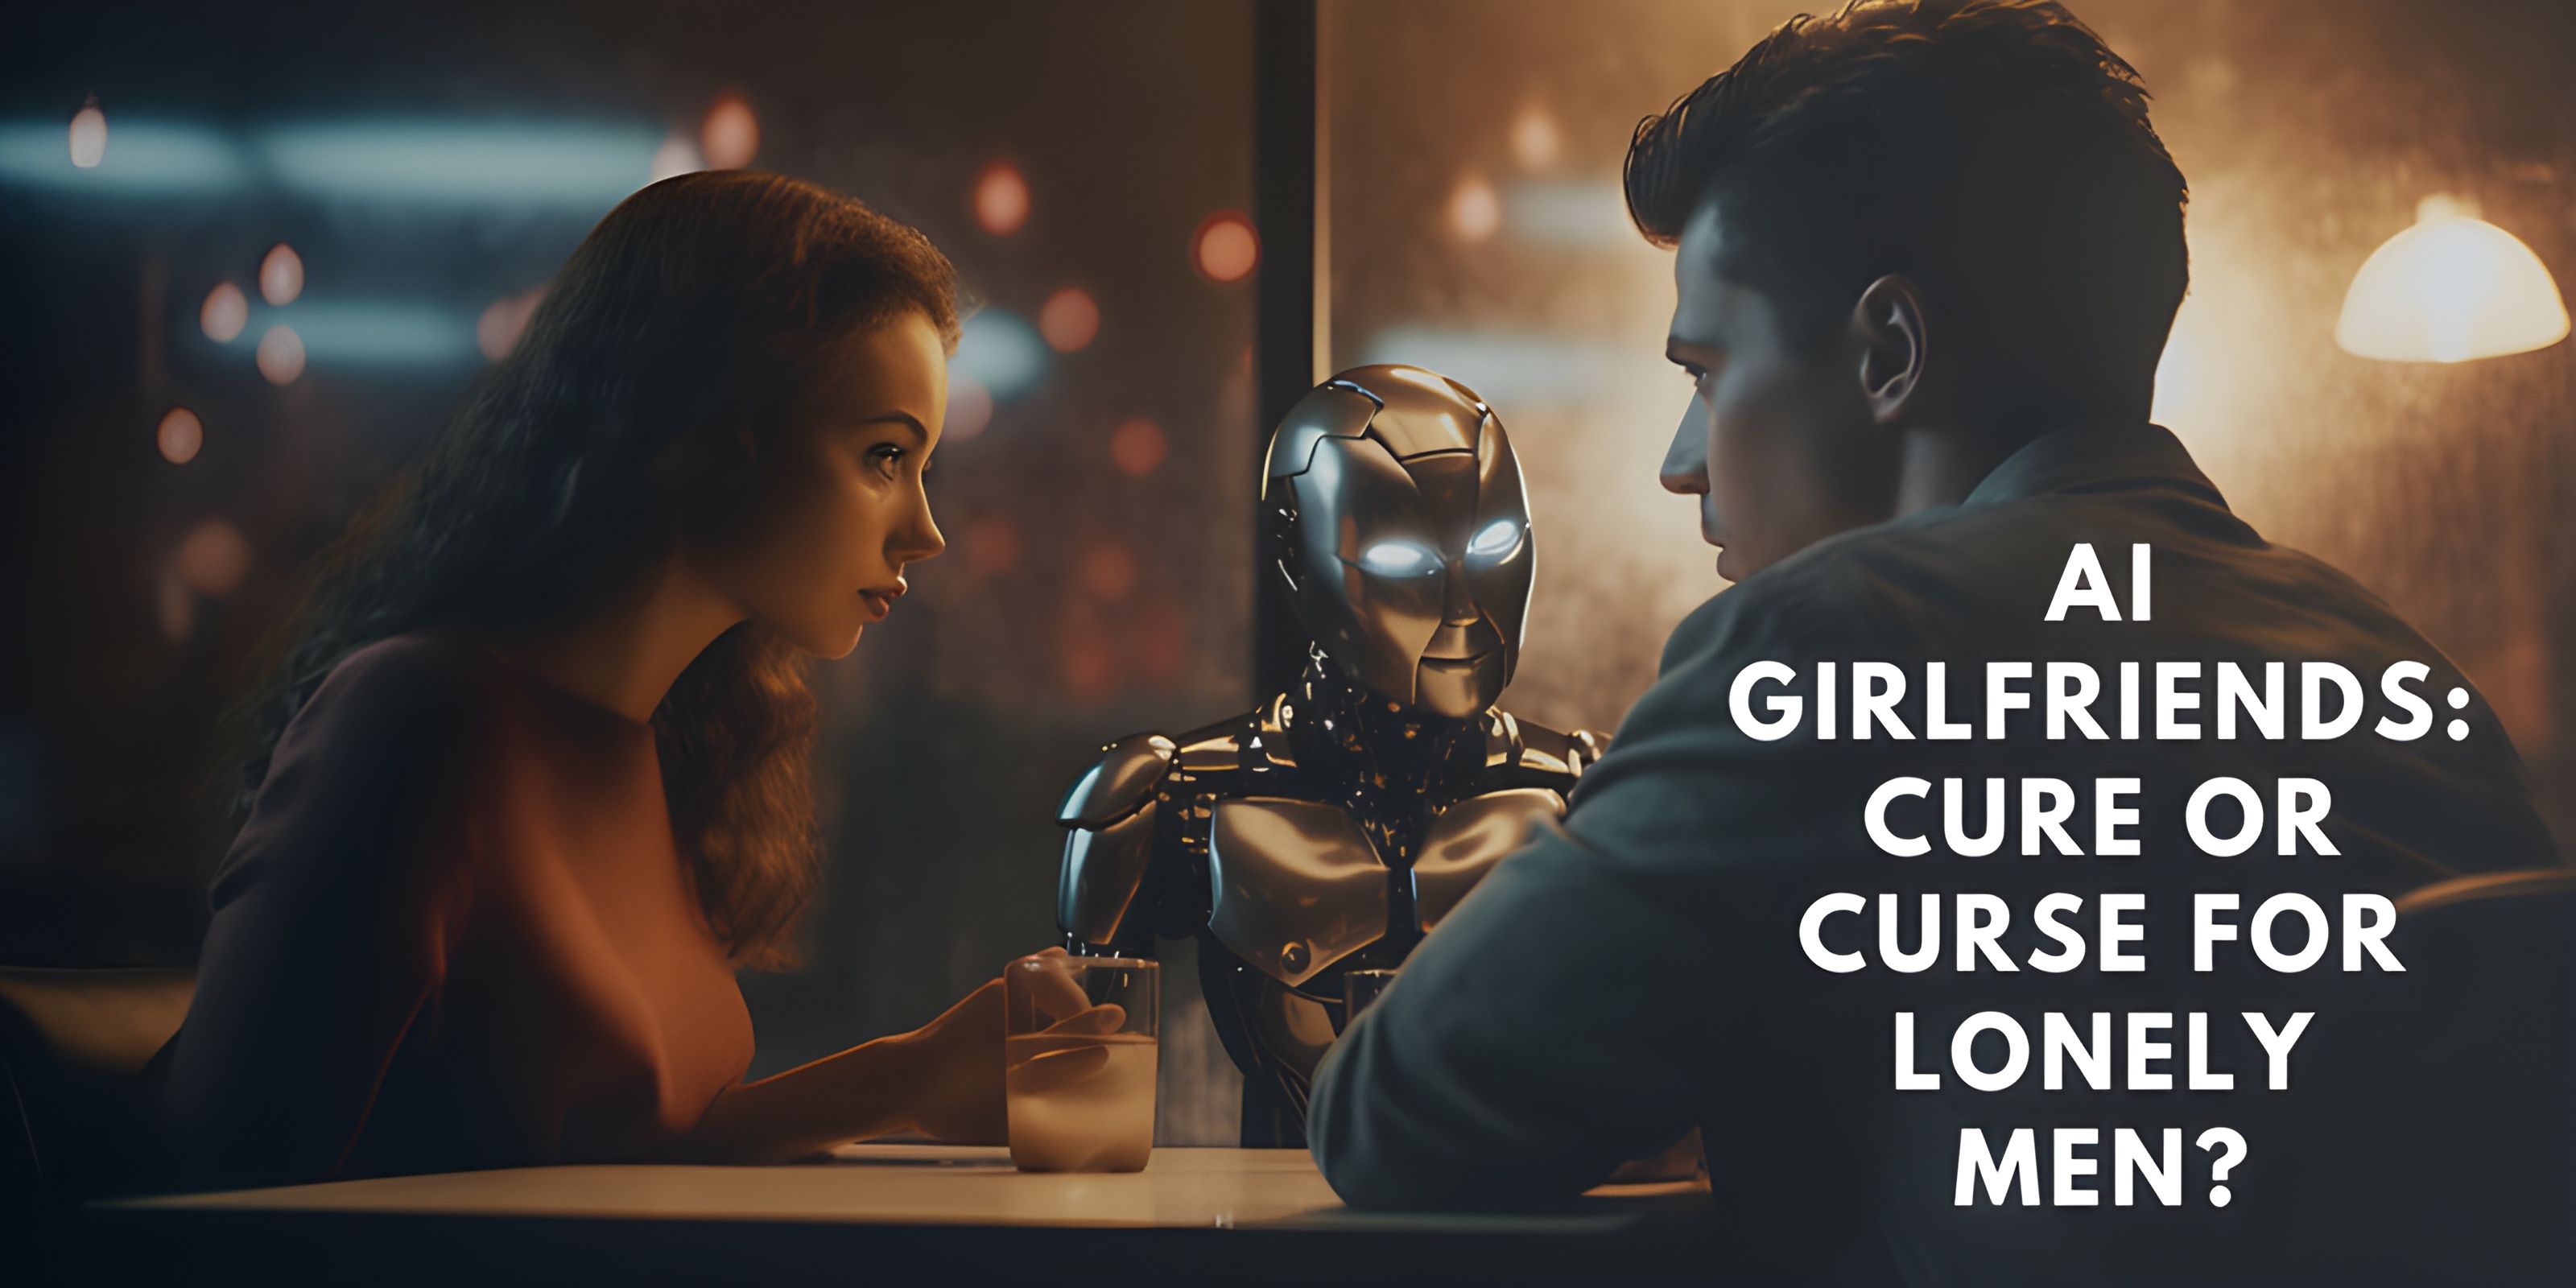 AI Girlfriends: Cure or Curse for Lonely Men?